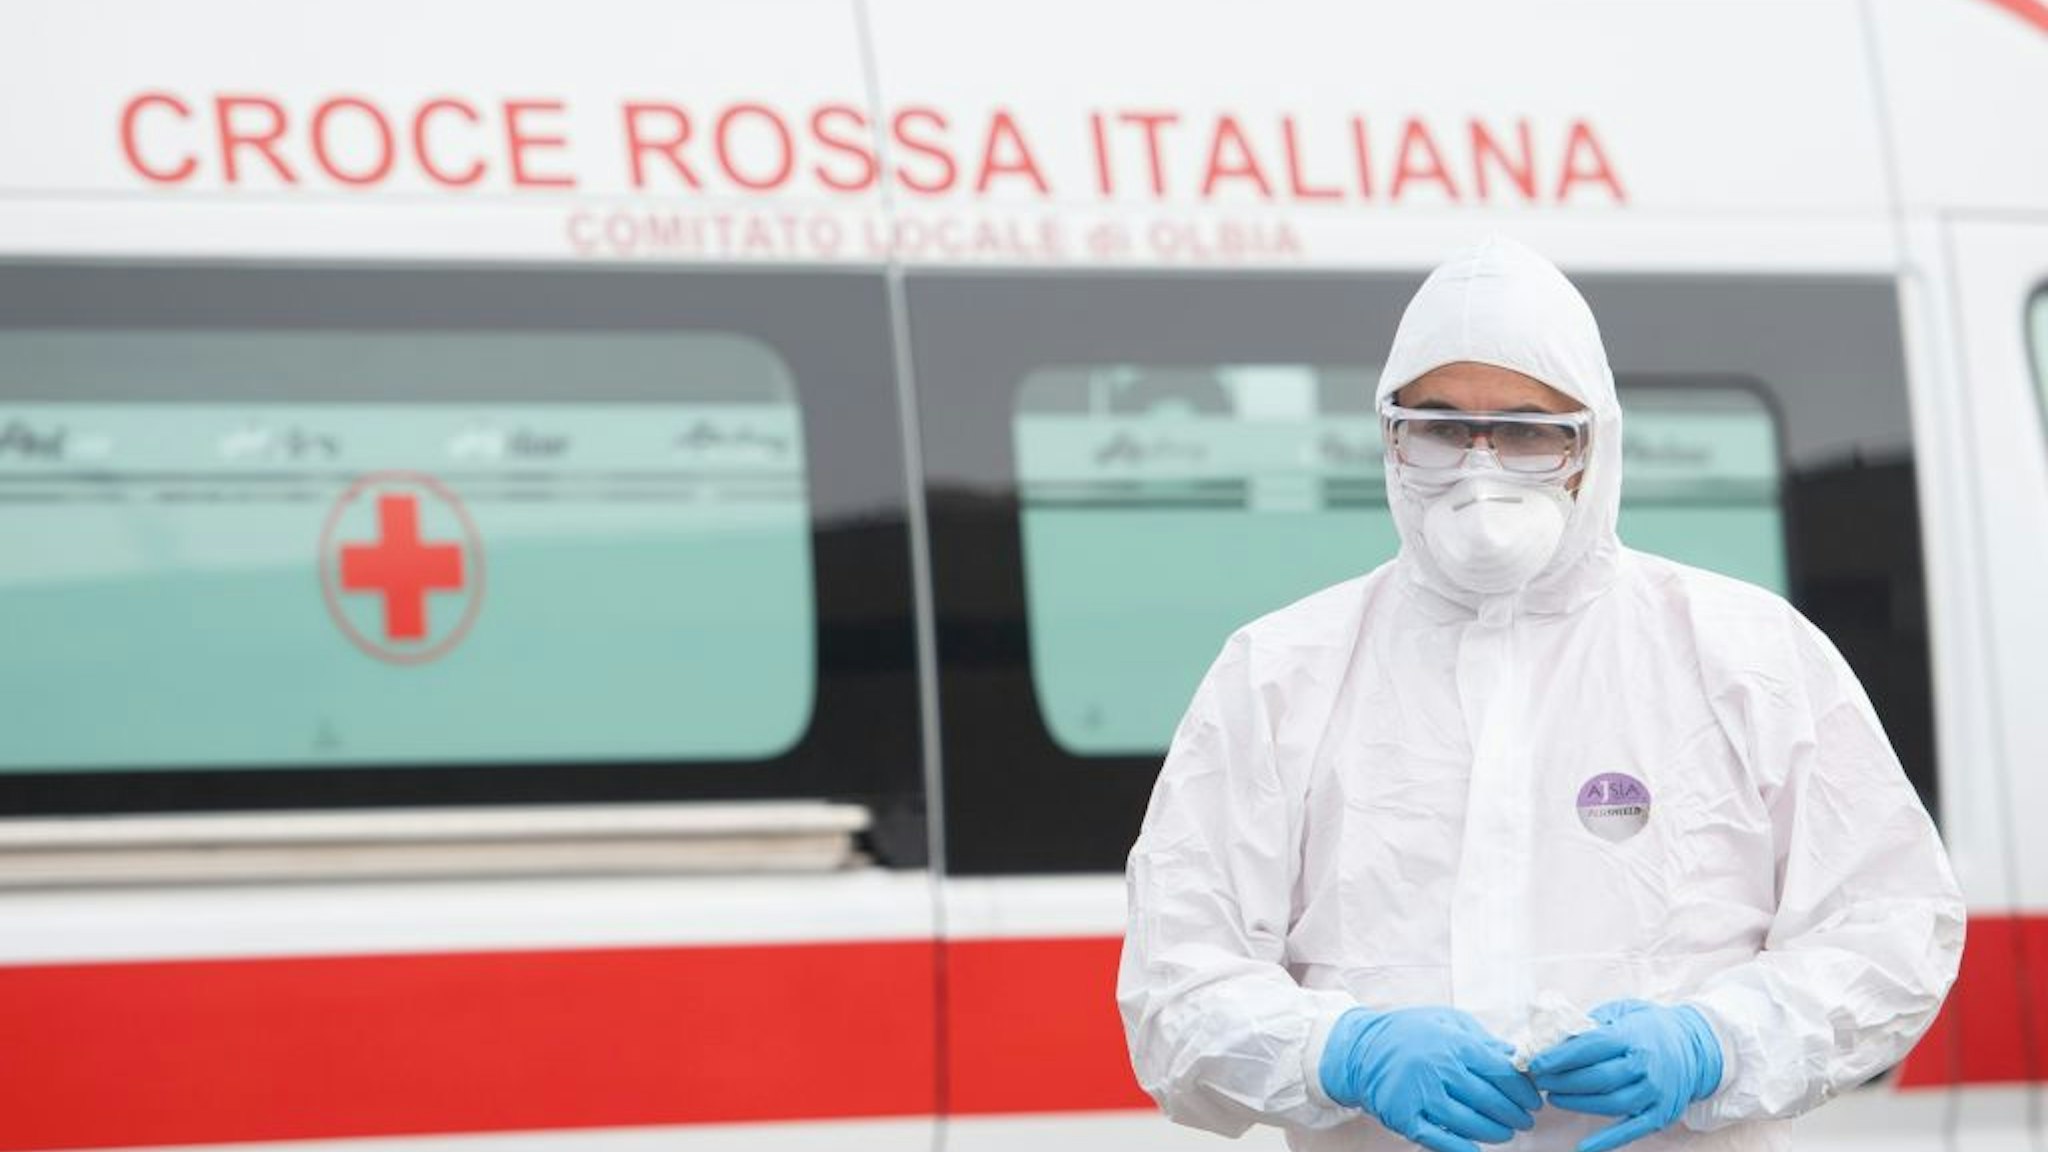 A volunteer wears the protections imposed by the Italian government against coronavirus on March 14, 2020 in Olbia, Italy.